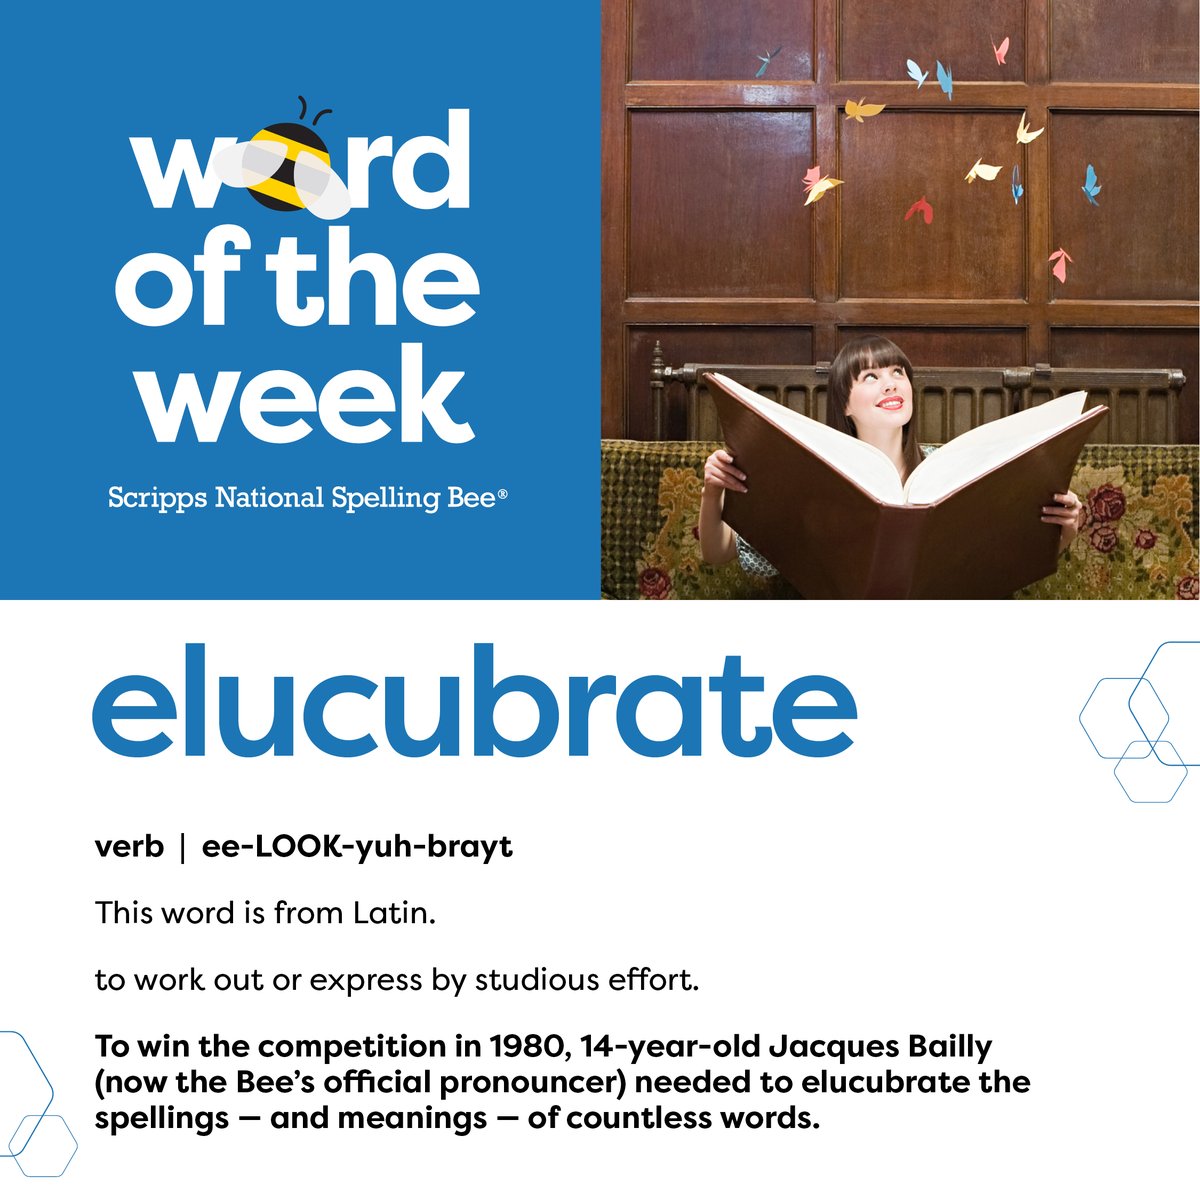 To elucubrate, or not to elucubrate. That is the question... and your response probably depends on how you also answer 'To Bee or not to Bee.' 

@MerriamWebster, the official dictionary of the Scripps National Spelling Bee. #wordoftheweek #spellingbee